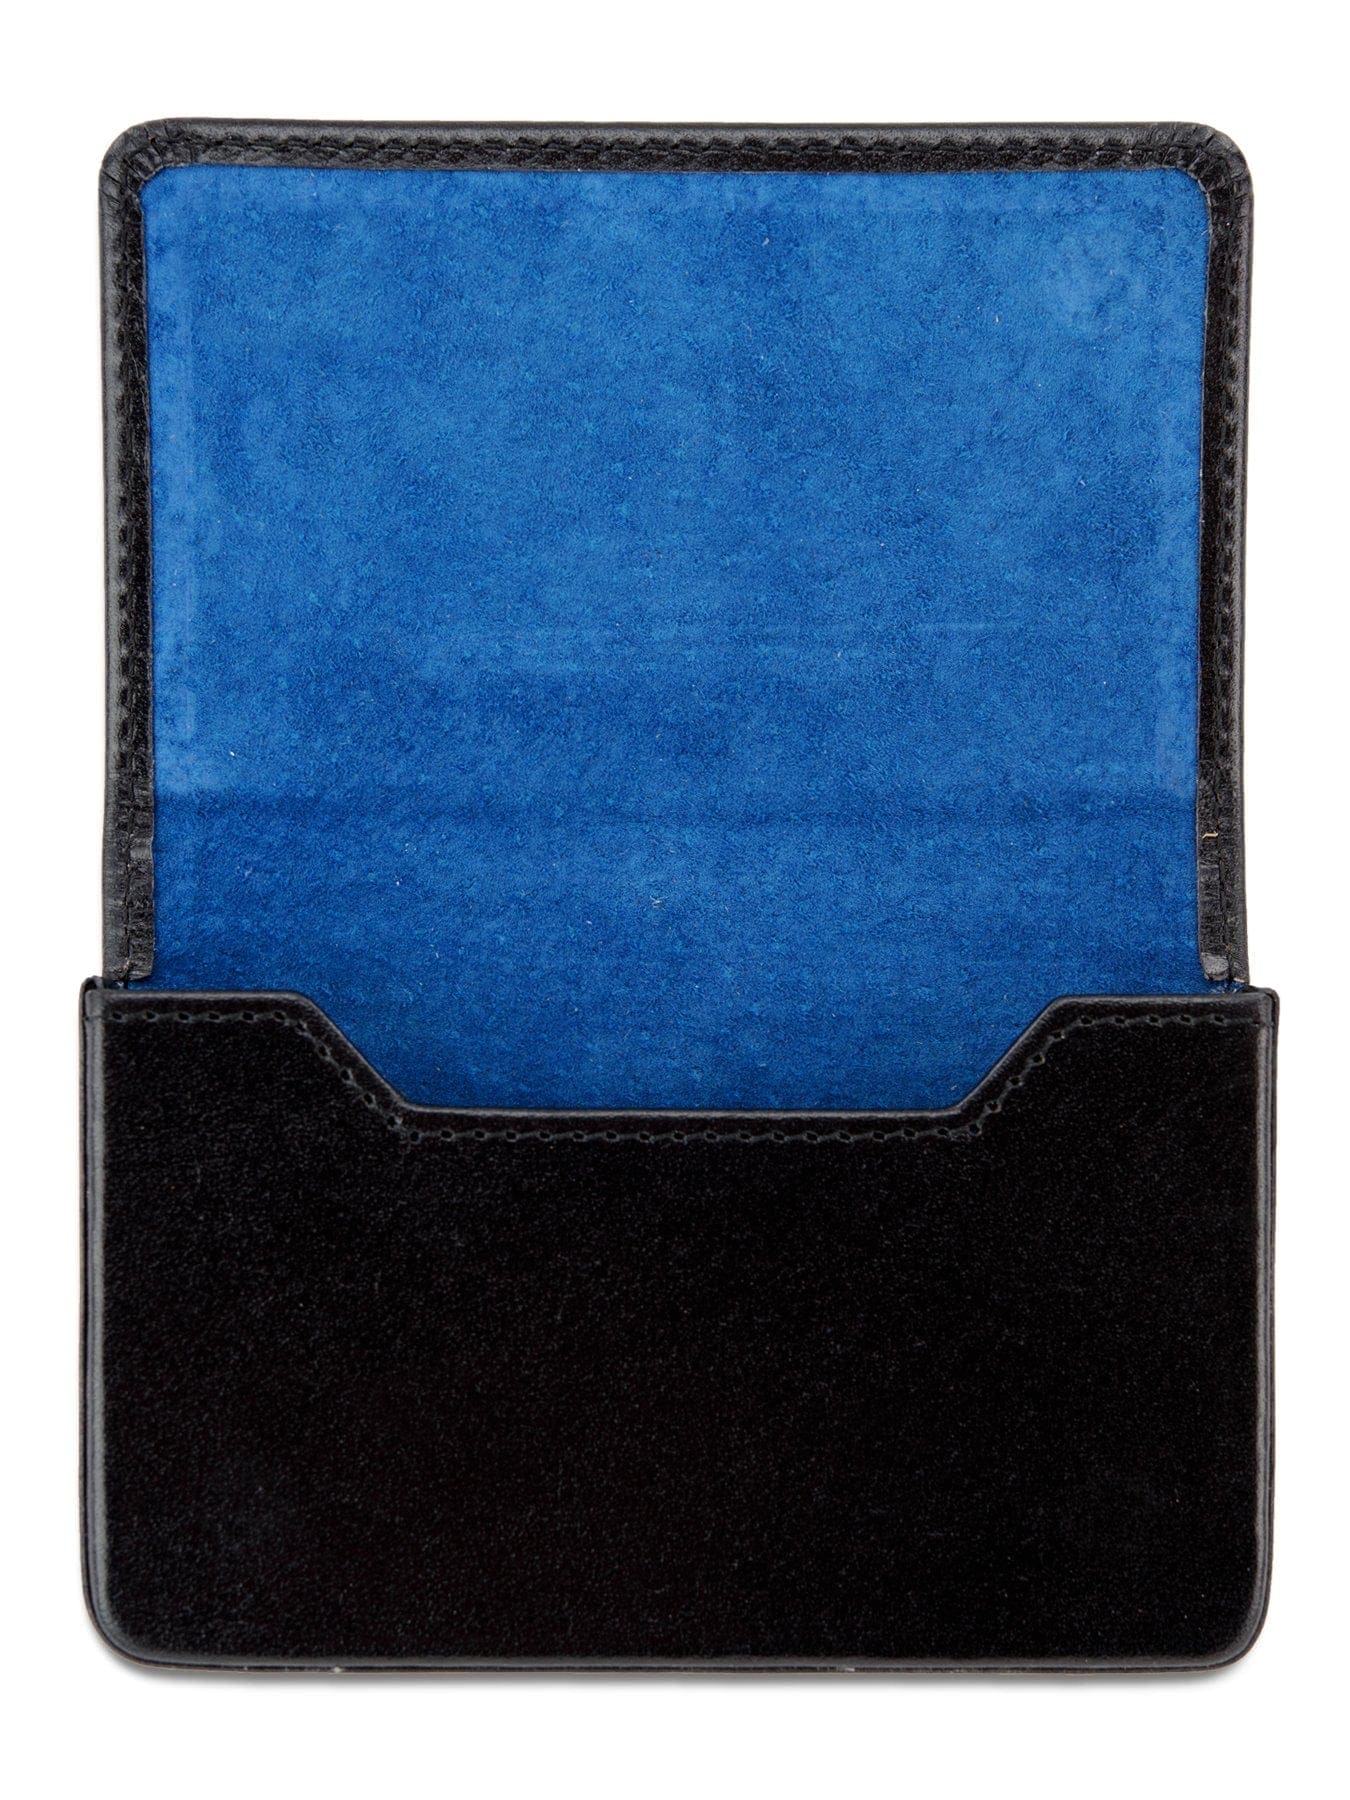 Black Calf Leather with Blue Suede Business Card Holder - Hilditch & Key